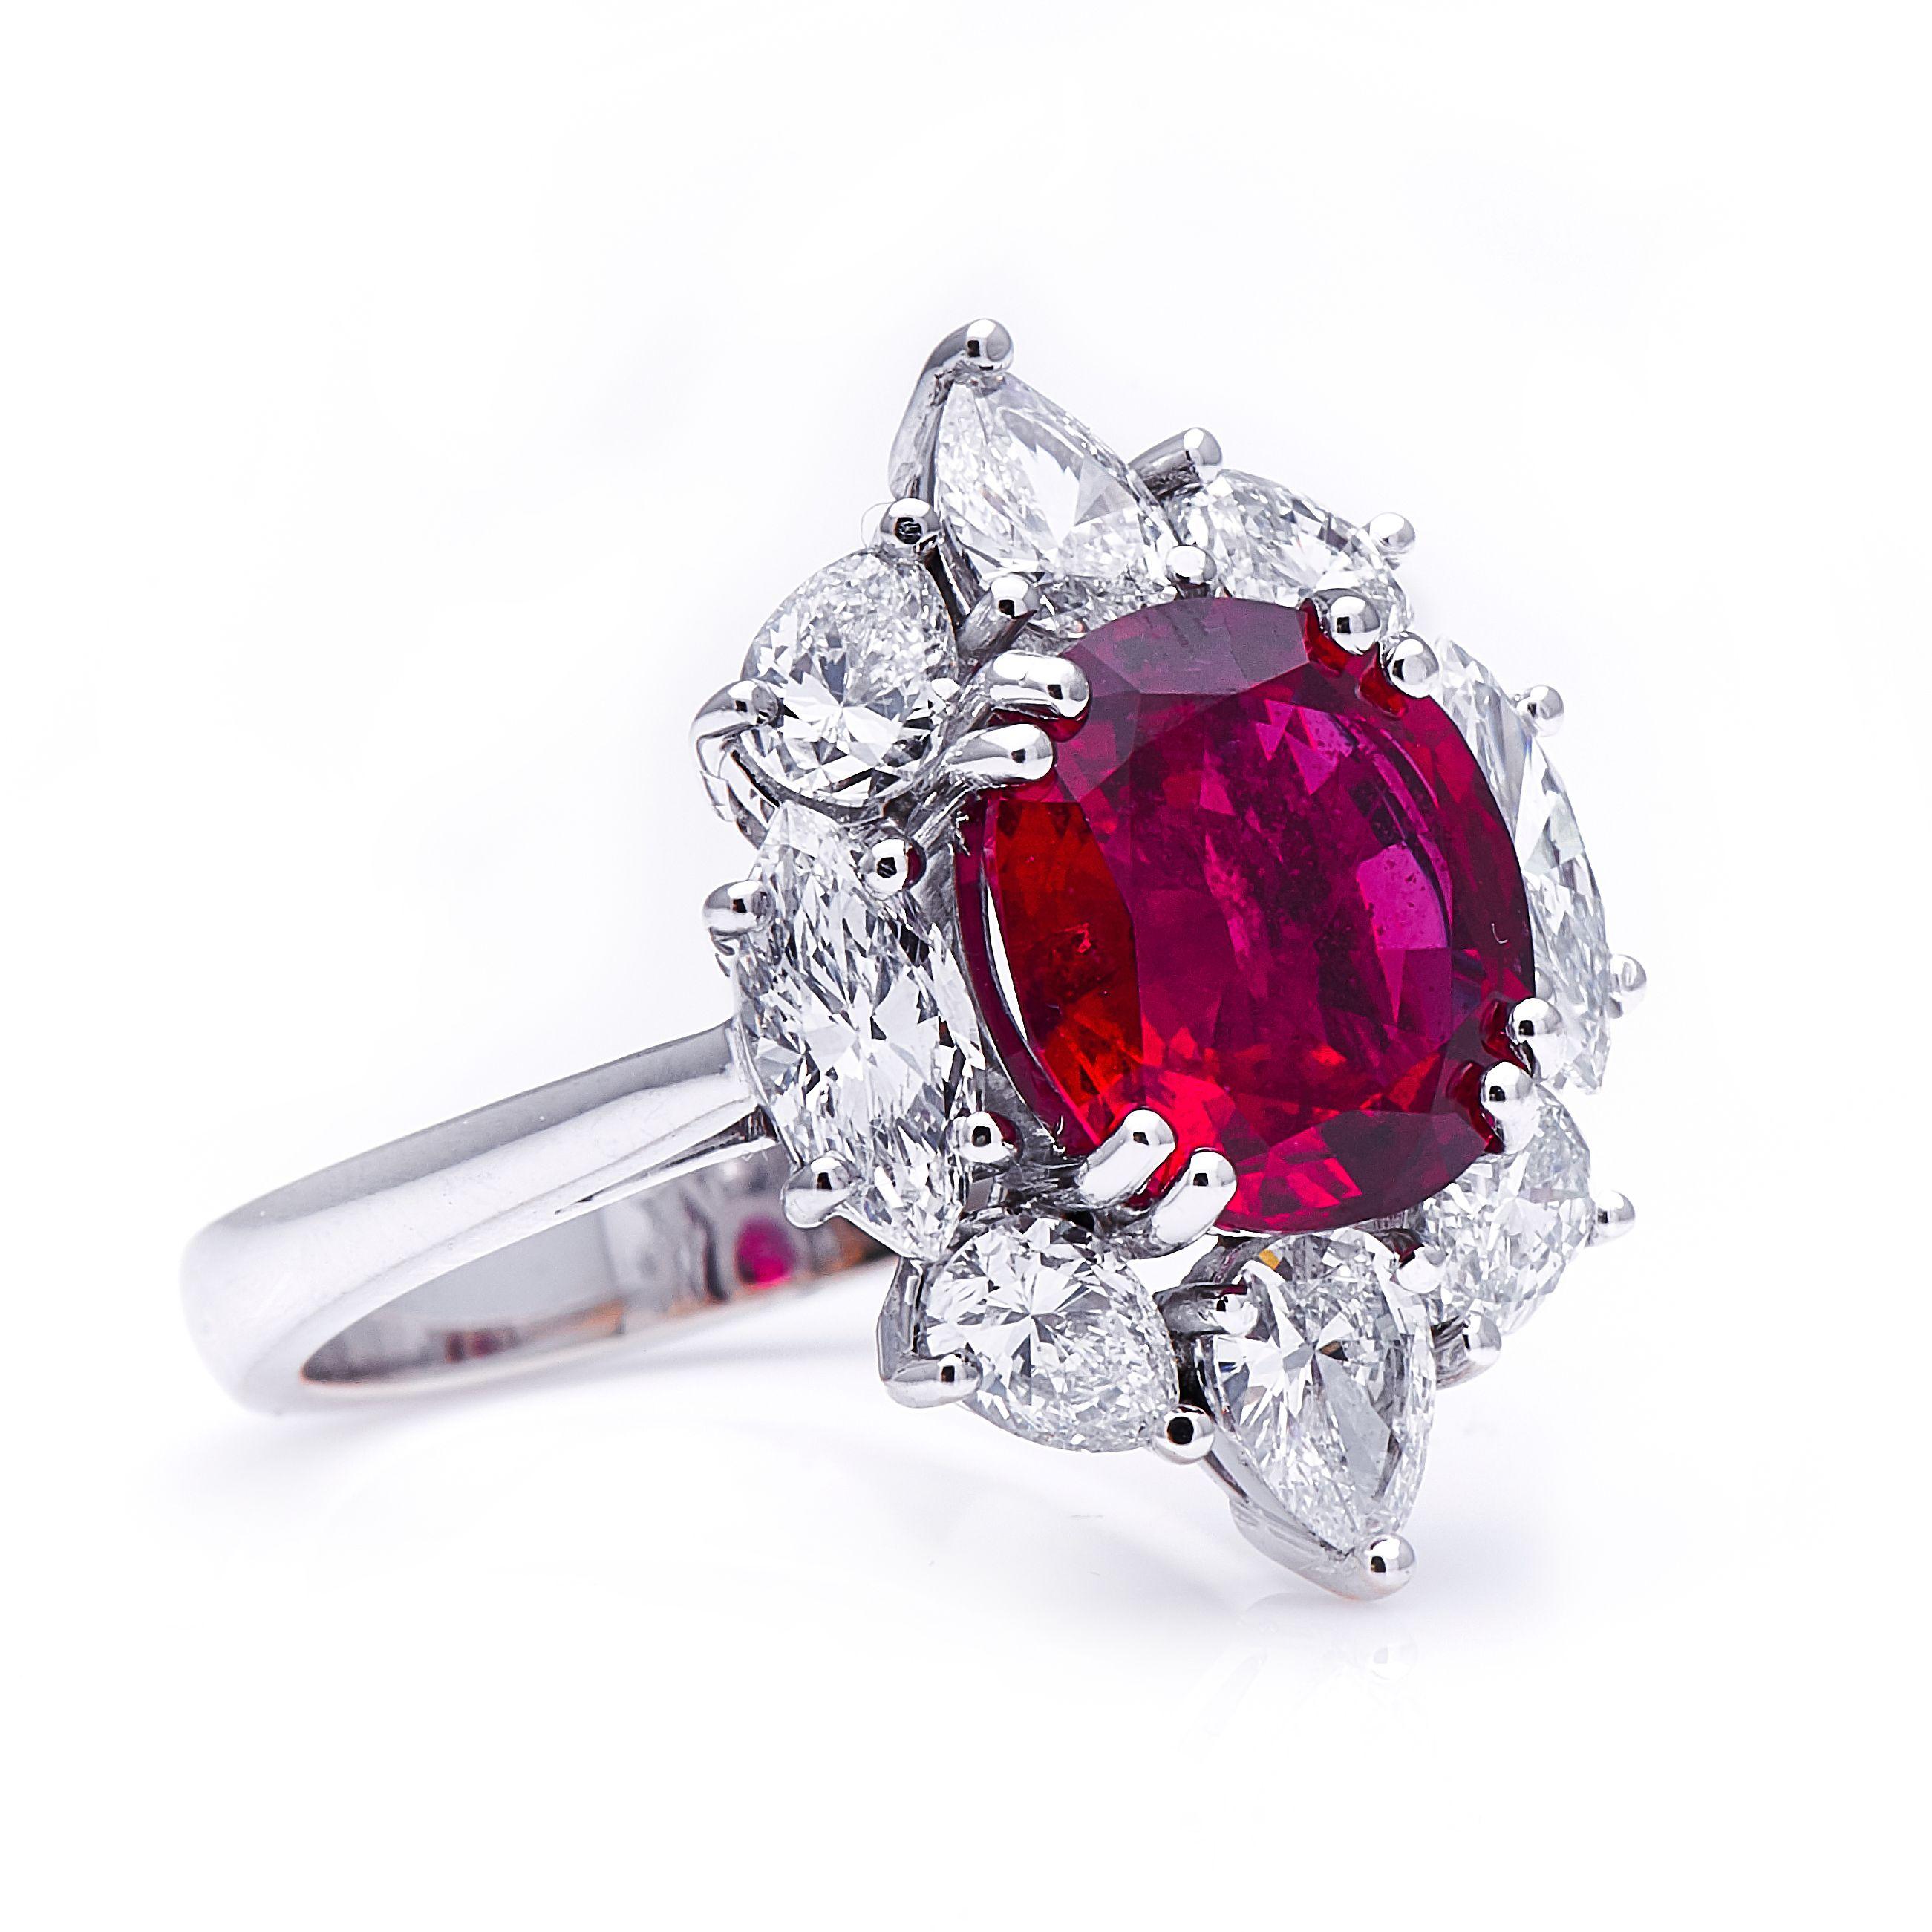 ‘Pigeon’s Blood’ ruby and diamond ring. The 4.27 carat unheated ruby at the centre of this ring is of extraordinary quality, displaying the vividly saturated, deep red known as ‘Pigeon’s Blood’. The exact description of ‘Pigeon’s Blood’ red varies